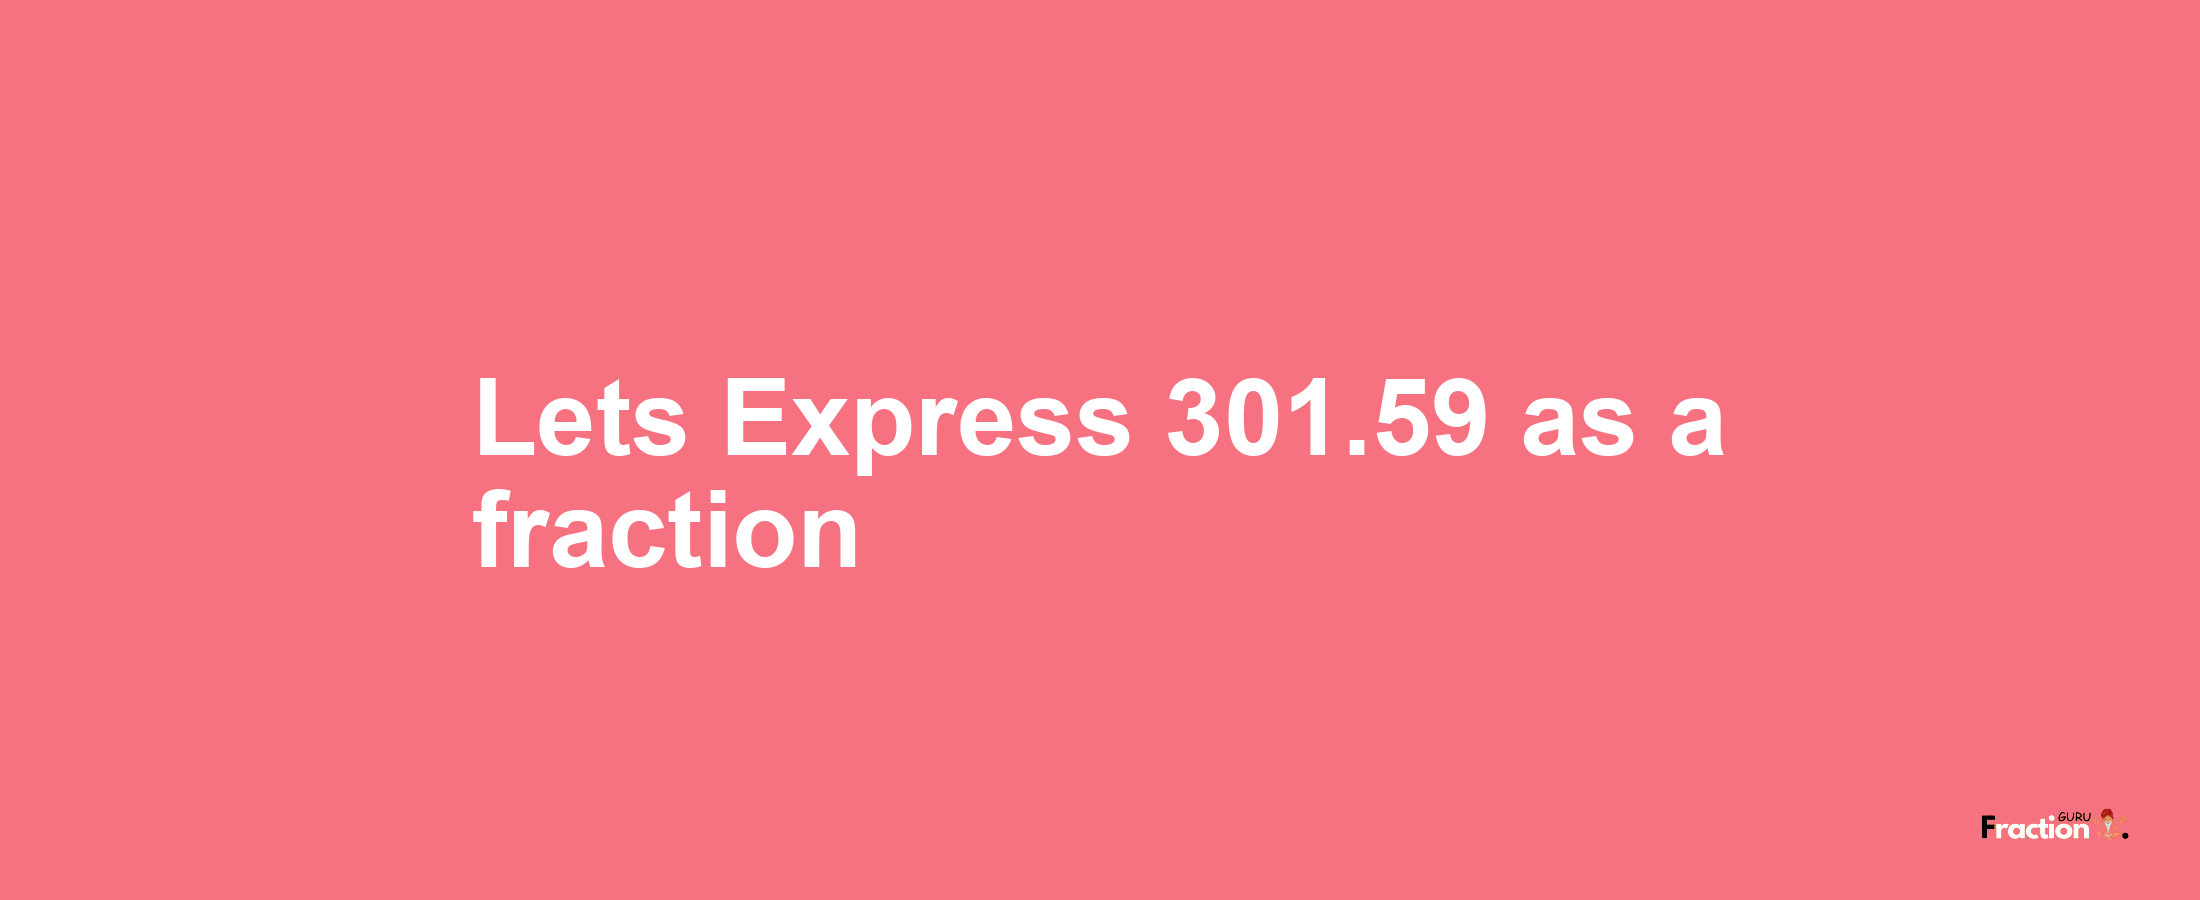 Lets Express 301.59 as afraction